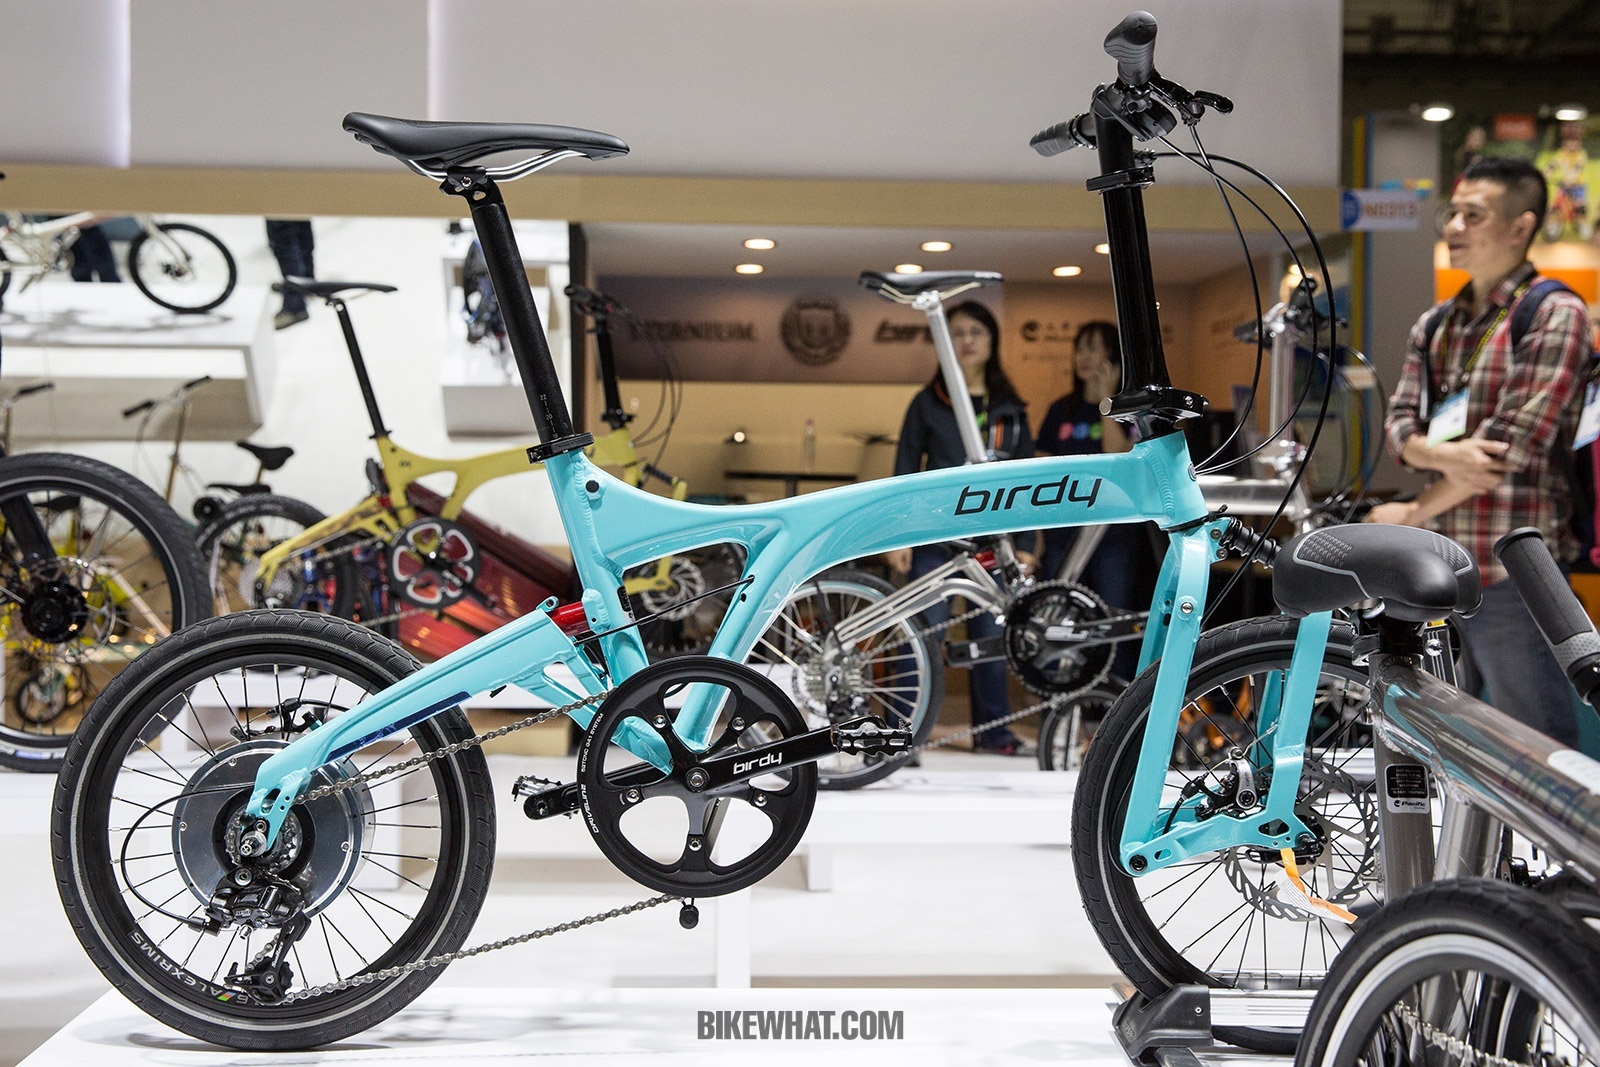 Feature_TaipeiCycle_2019_Birdy_zehus.jpg